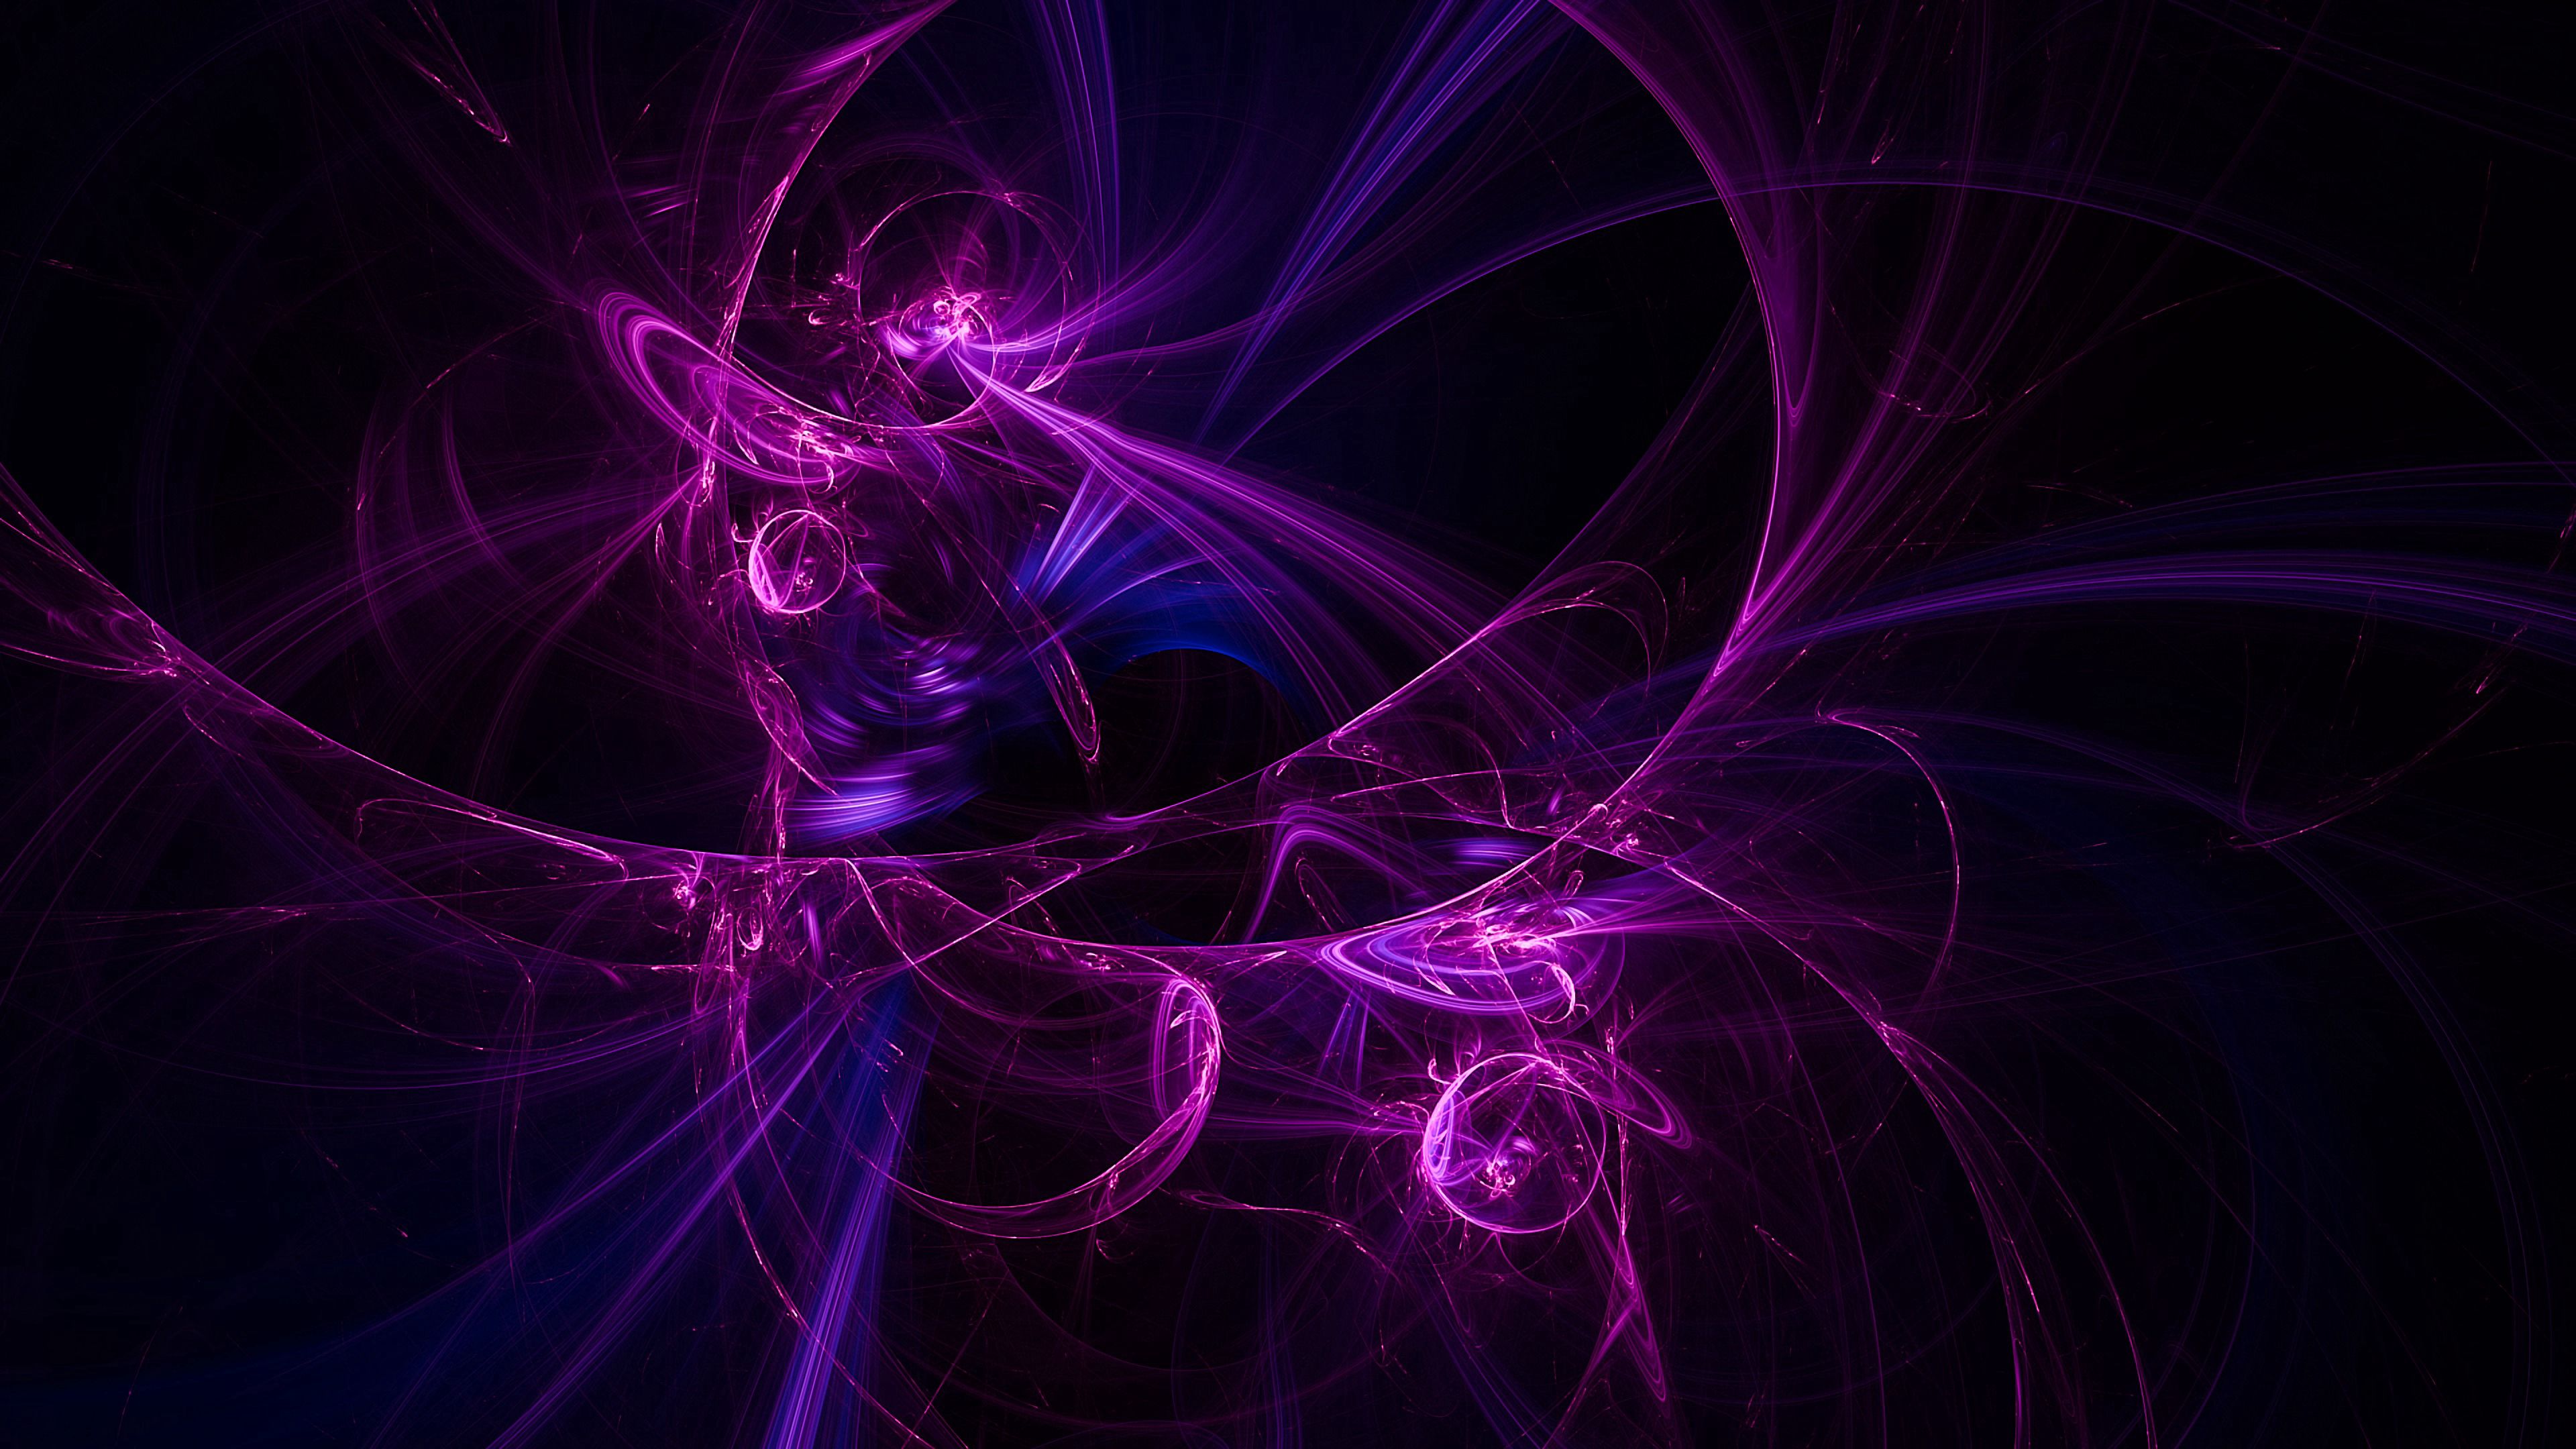 purple, beams, abstract, violet, rays, fractal, radiation